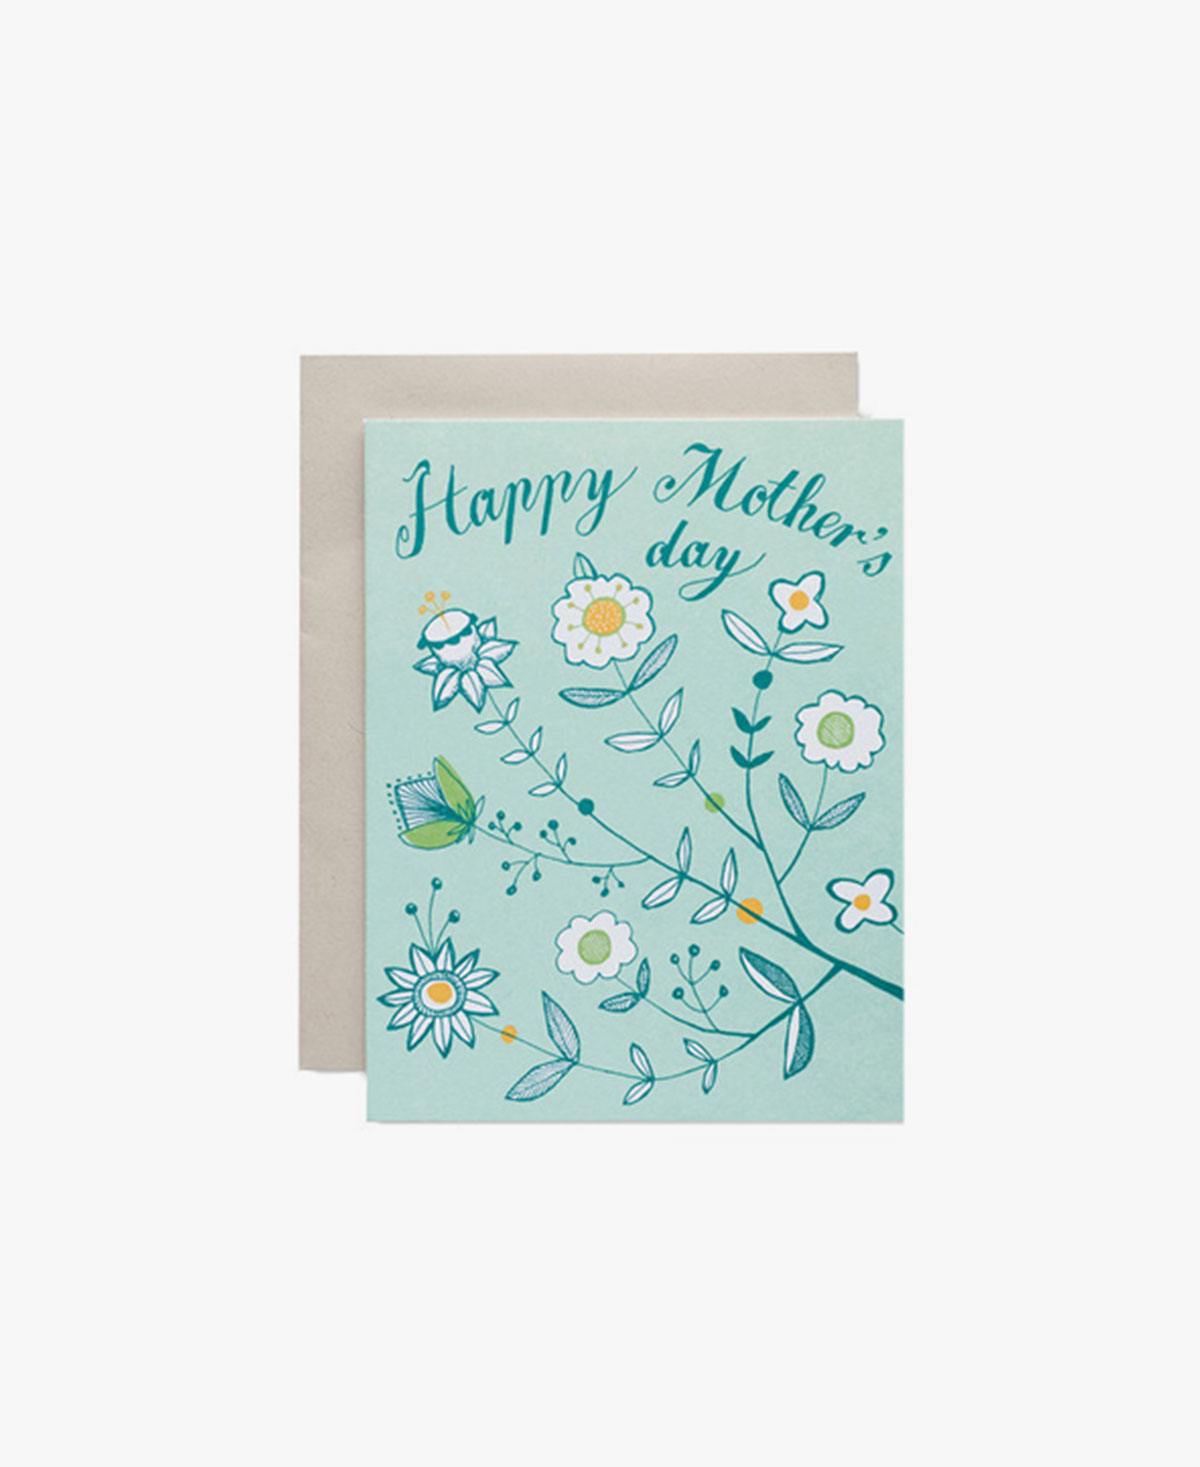 Happy mother’s day cards